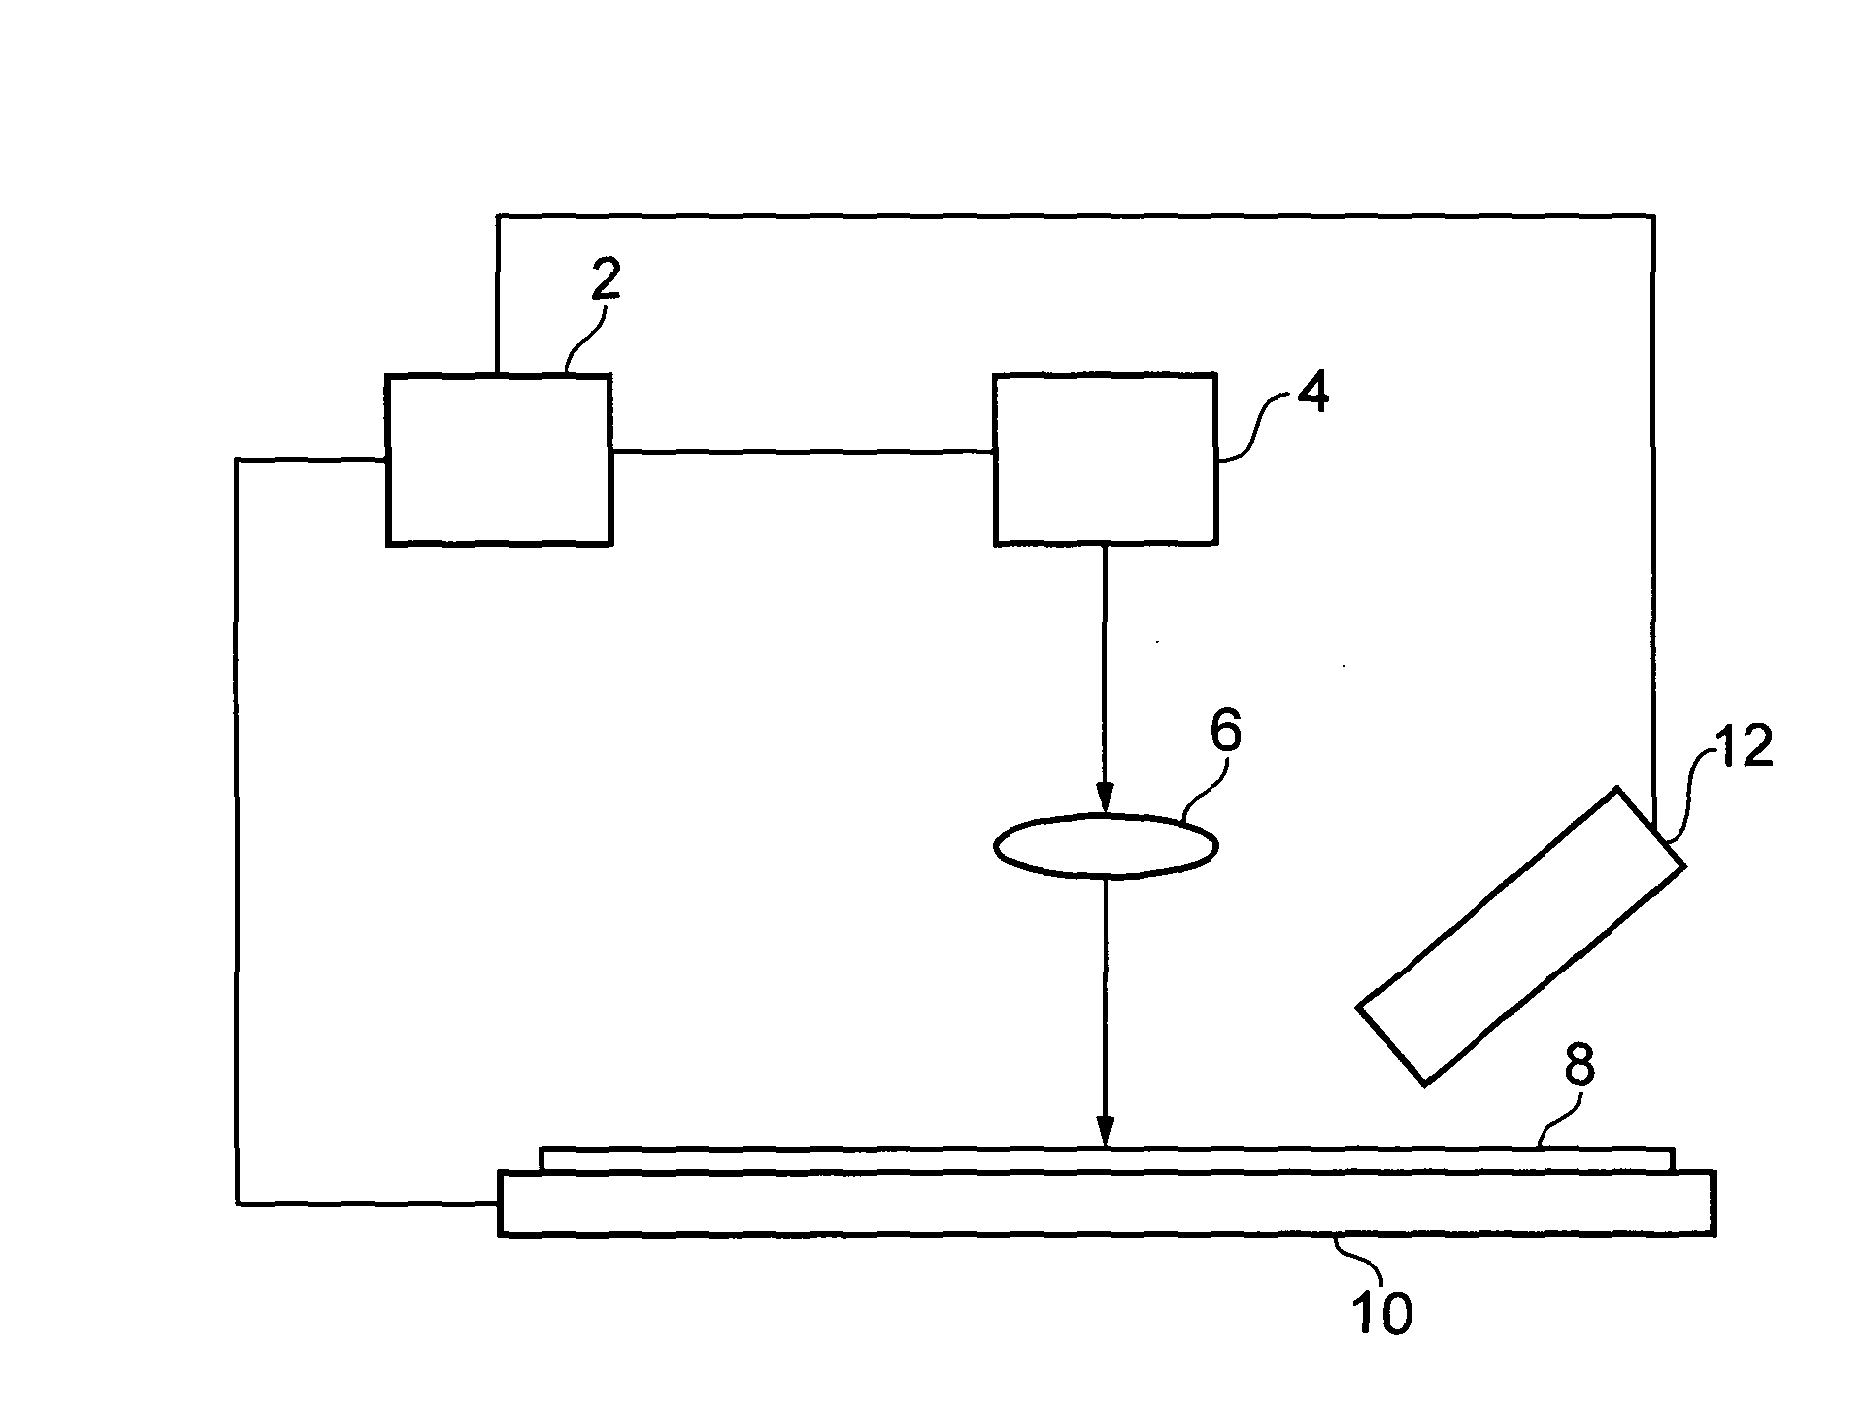 Method of forming an optical device